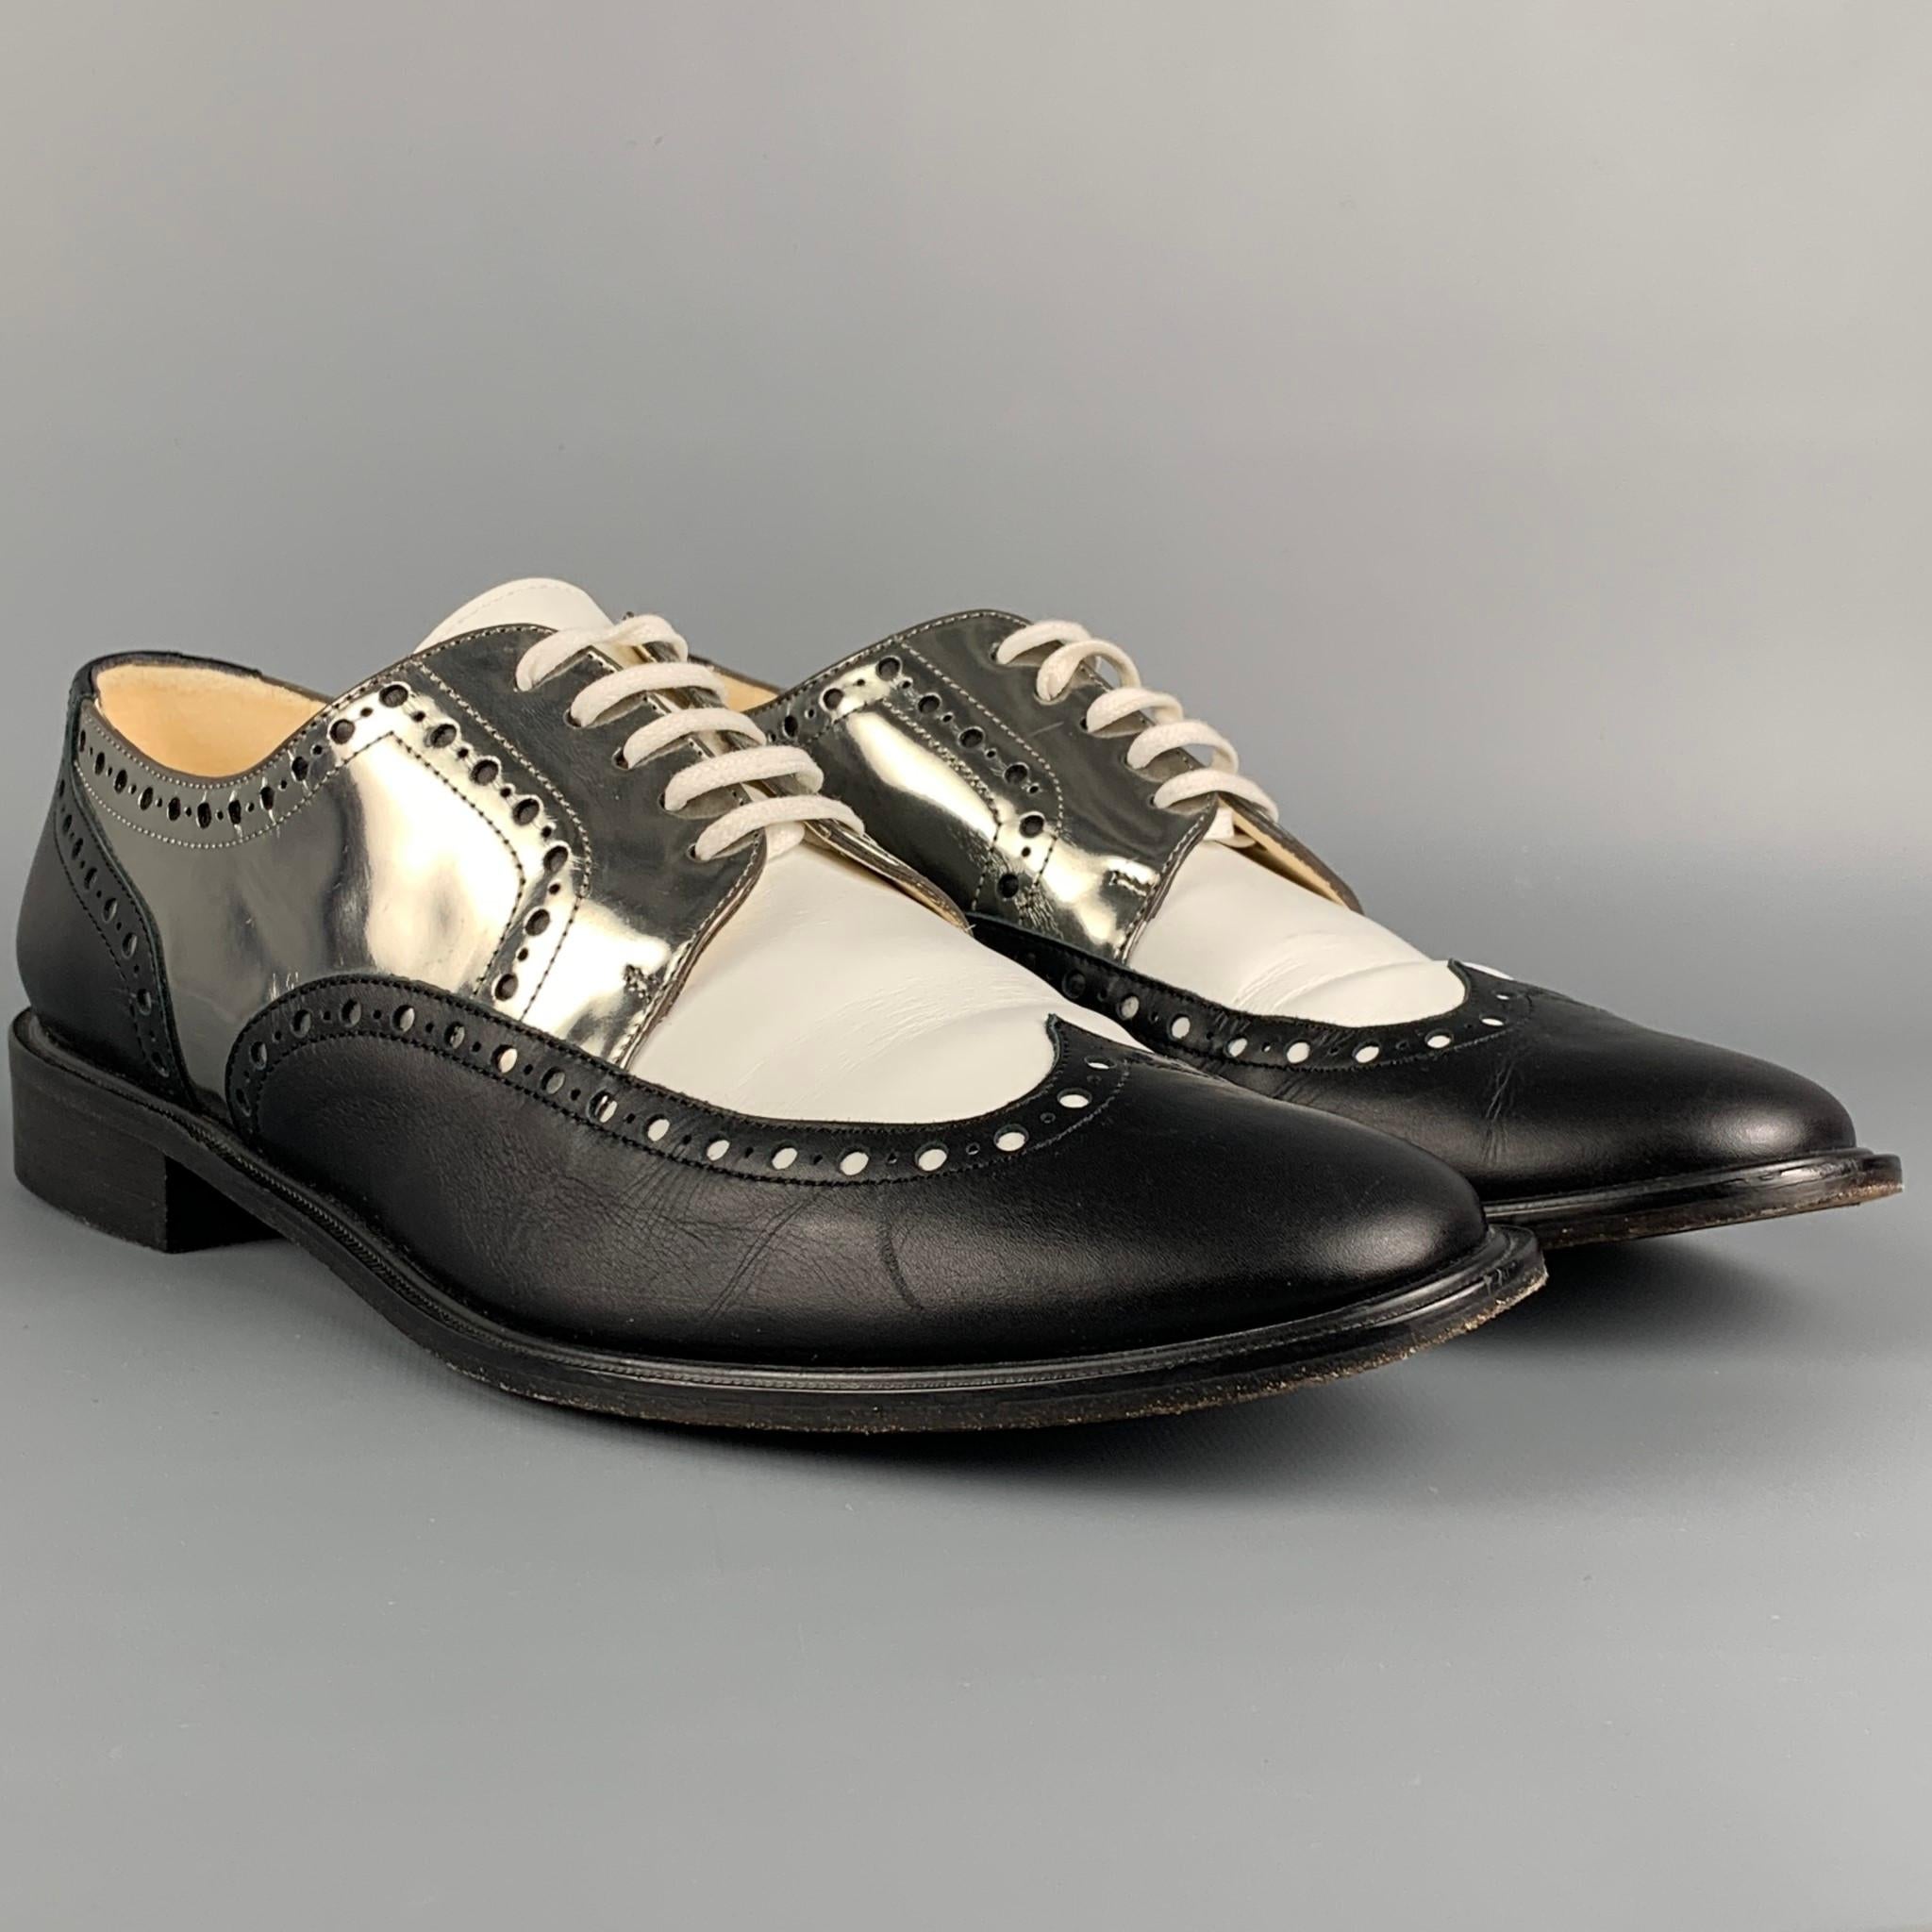 ROBERT CLERGERIE shoes comes in a black & white color block leather featuring a spectator style, metallic silver tone trim, and a lace up closure. Made in France. 

Very Good Pre-Owned Condition.
Marked: 40.5 B 01 1602 14

Outsole: 11.5 in. x 4 in. 